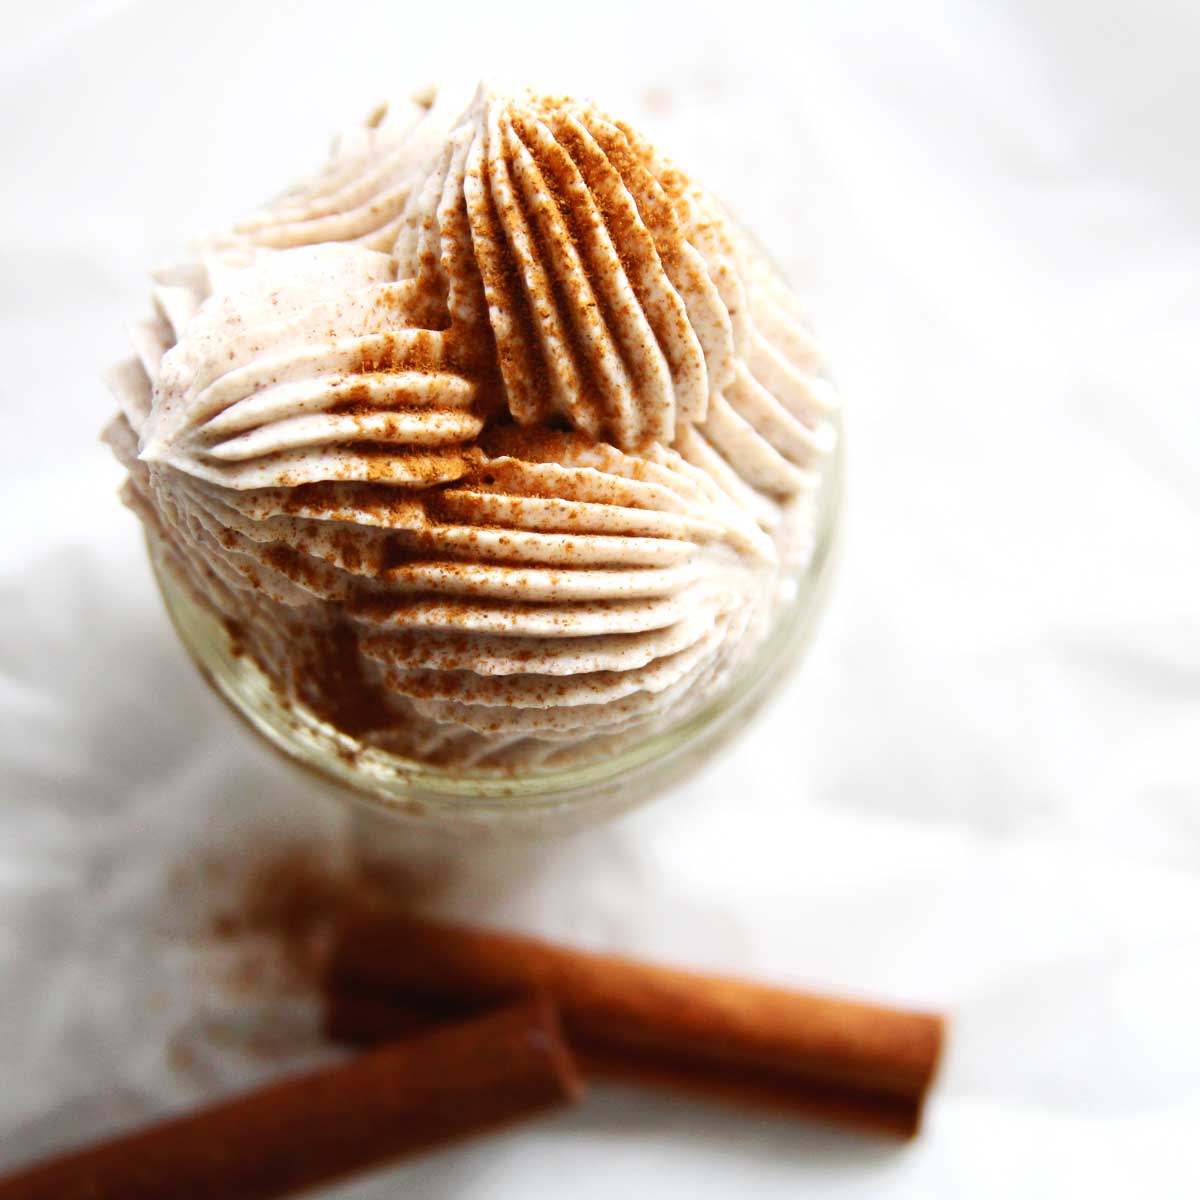 Sweet & Spicy Cinnamon Whipped Cream Recipe (Stabilized with Cream Cheese) - Peppermint Whipped Cream